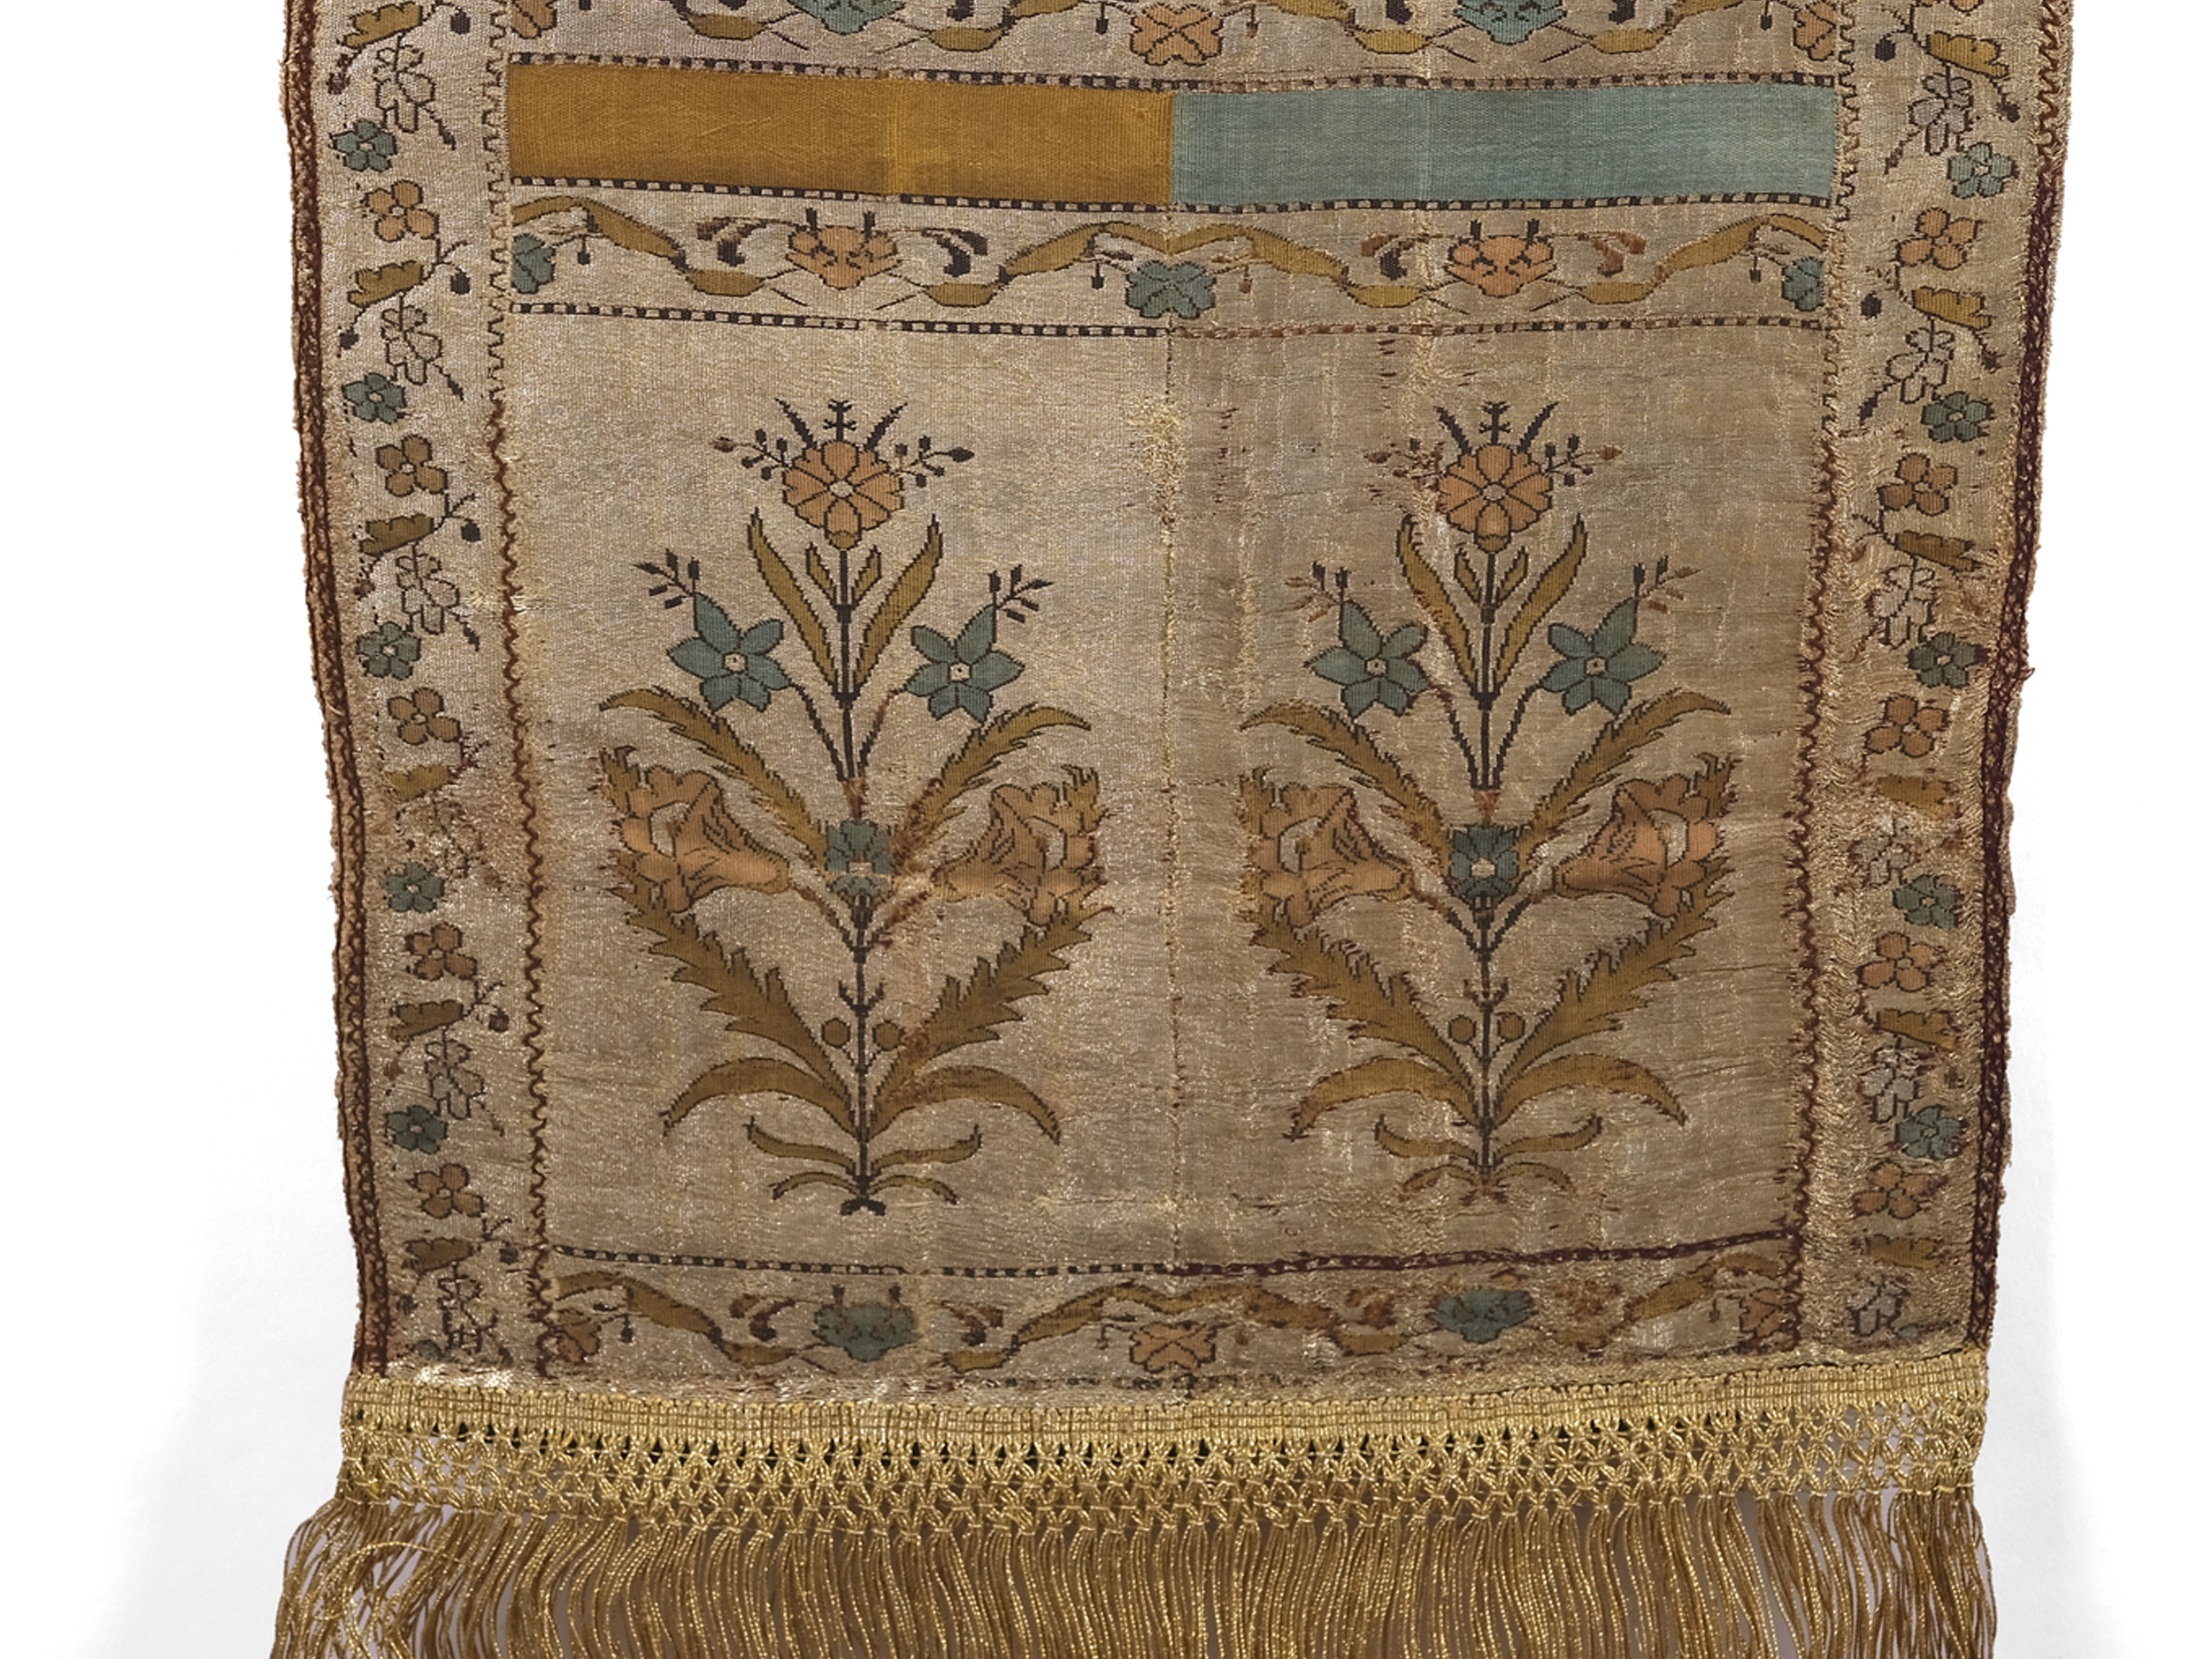 Textile with floral patterns, Indo-Persian, 18th/19th century - Image 4 of 5